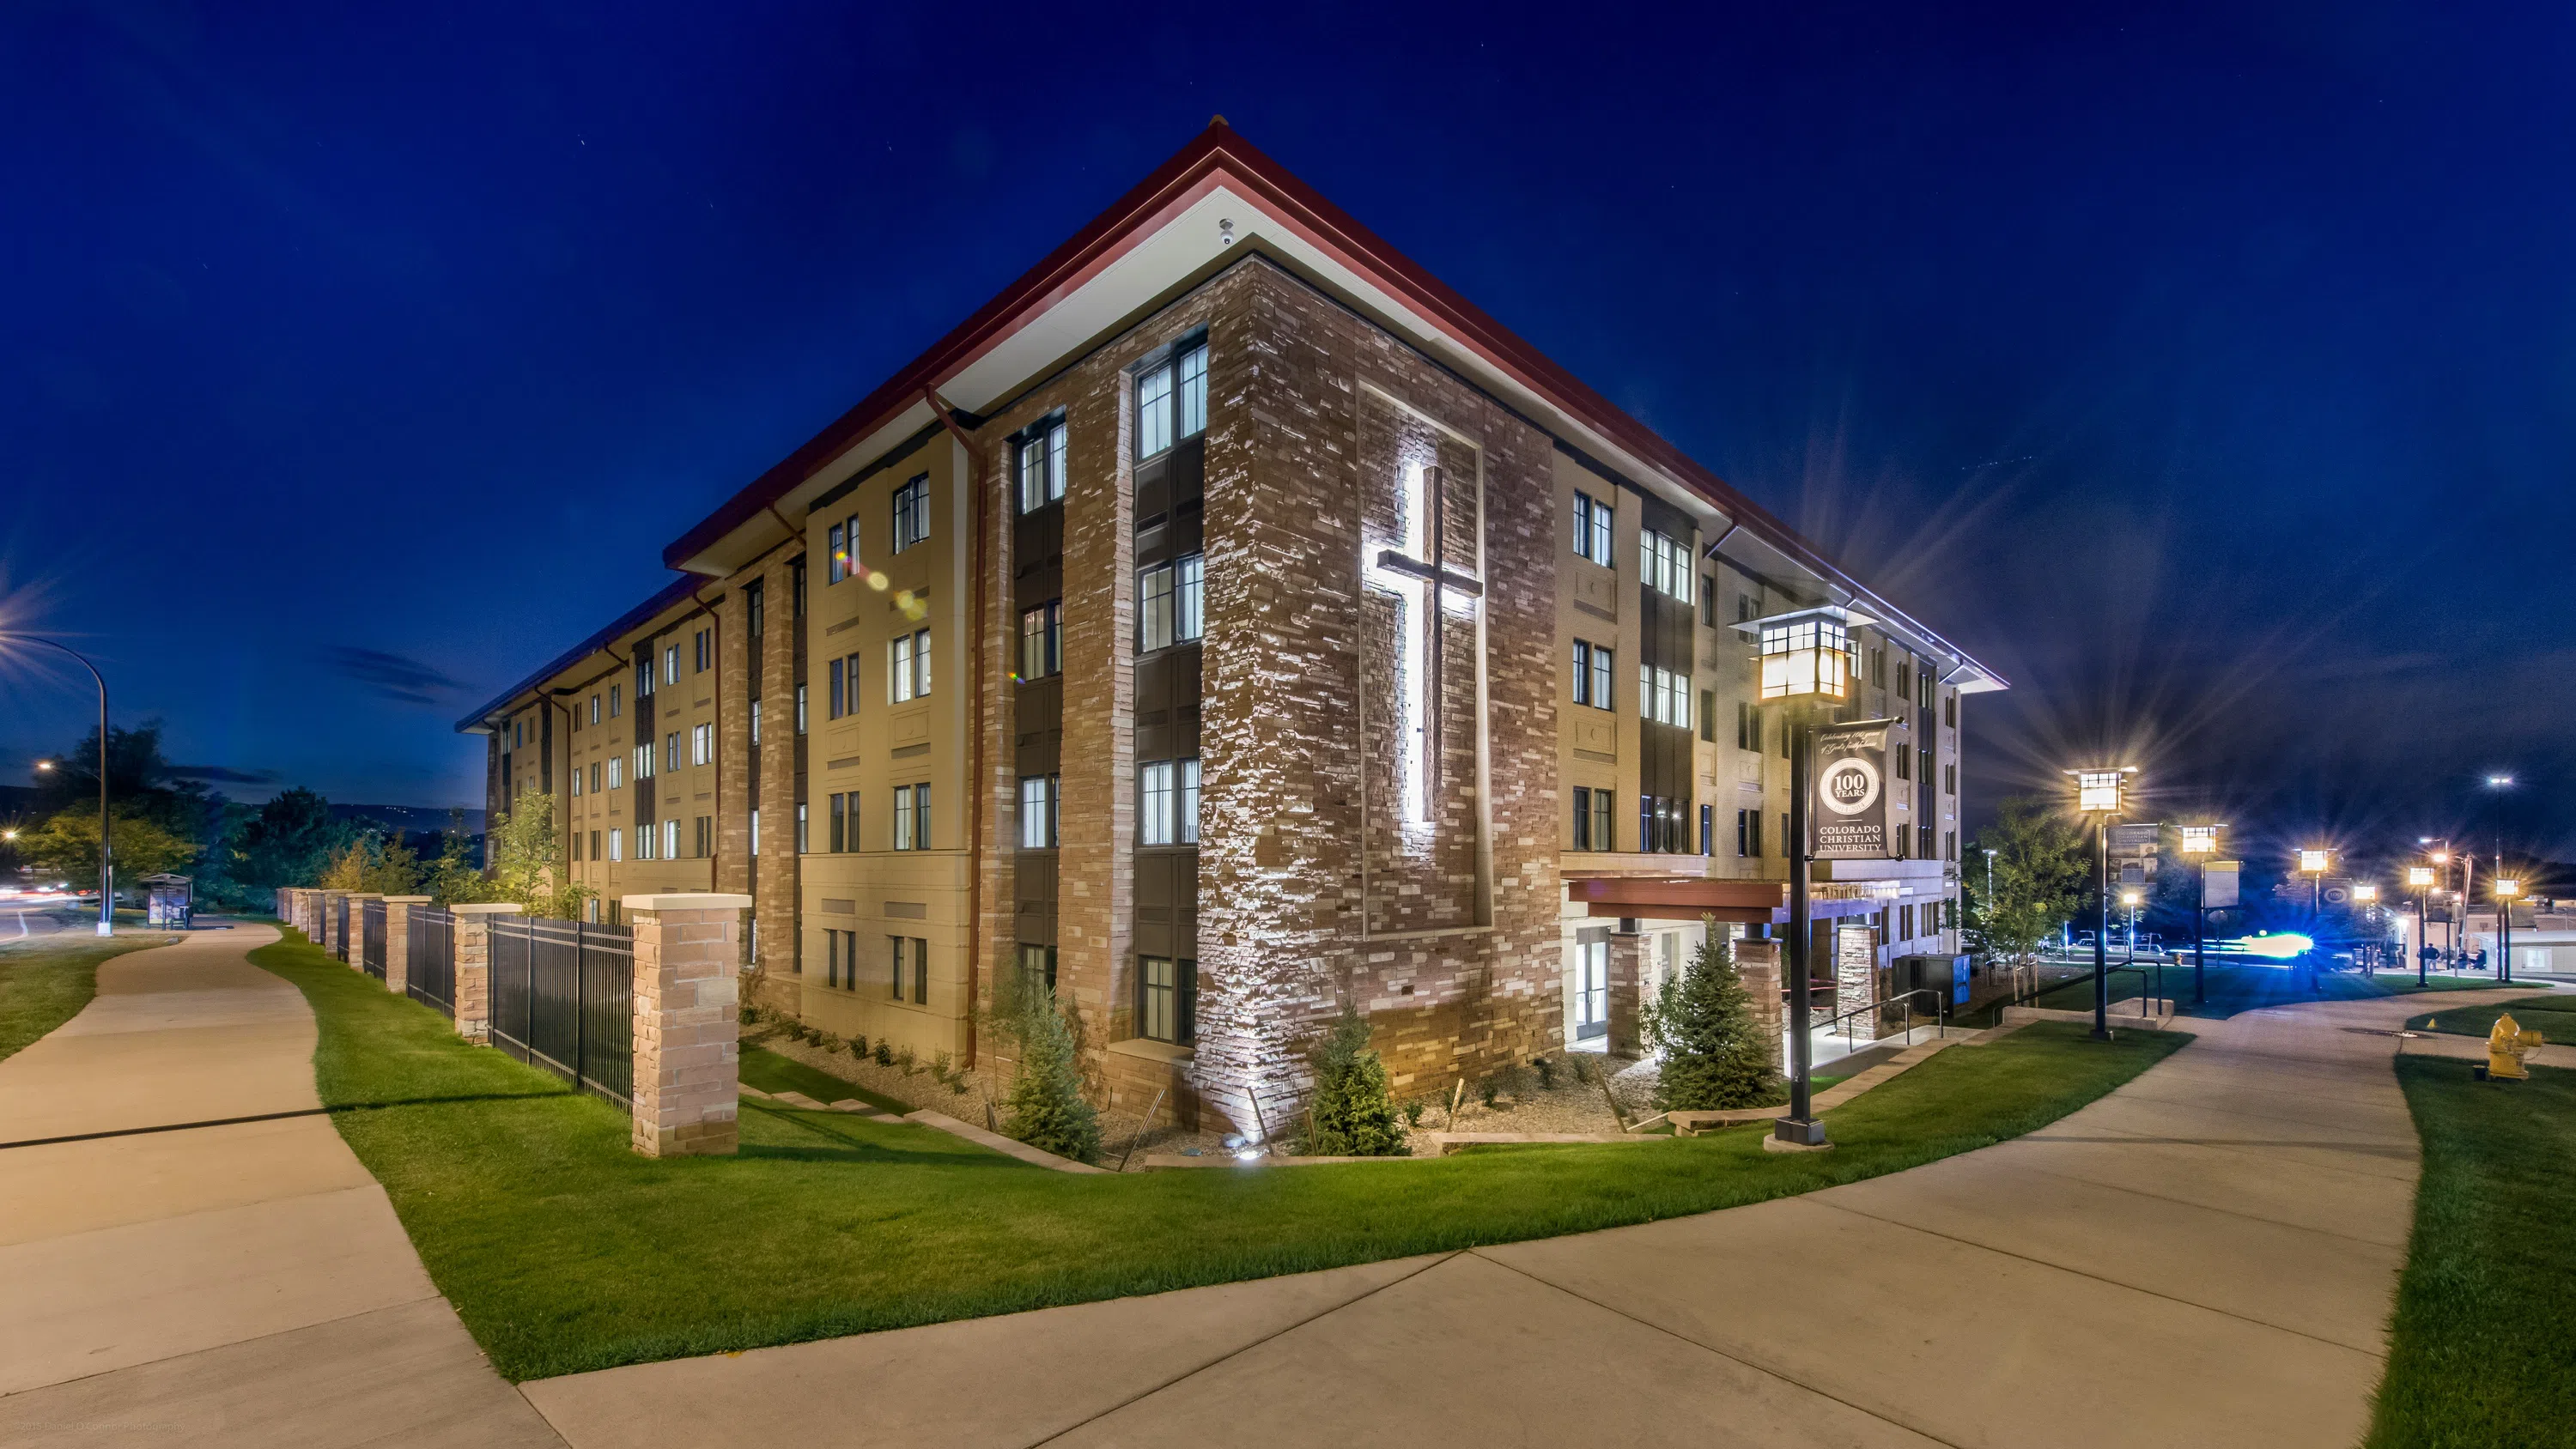 Yetter apartments lit up at night with an illuminated cross on the side